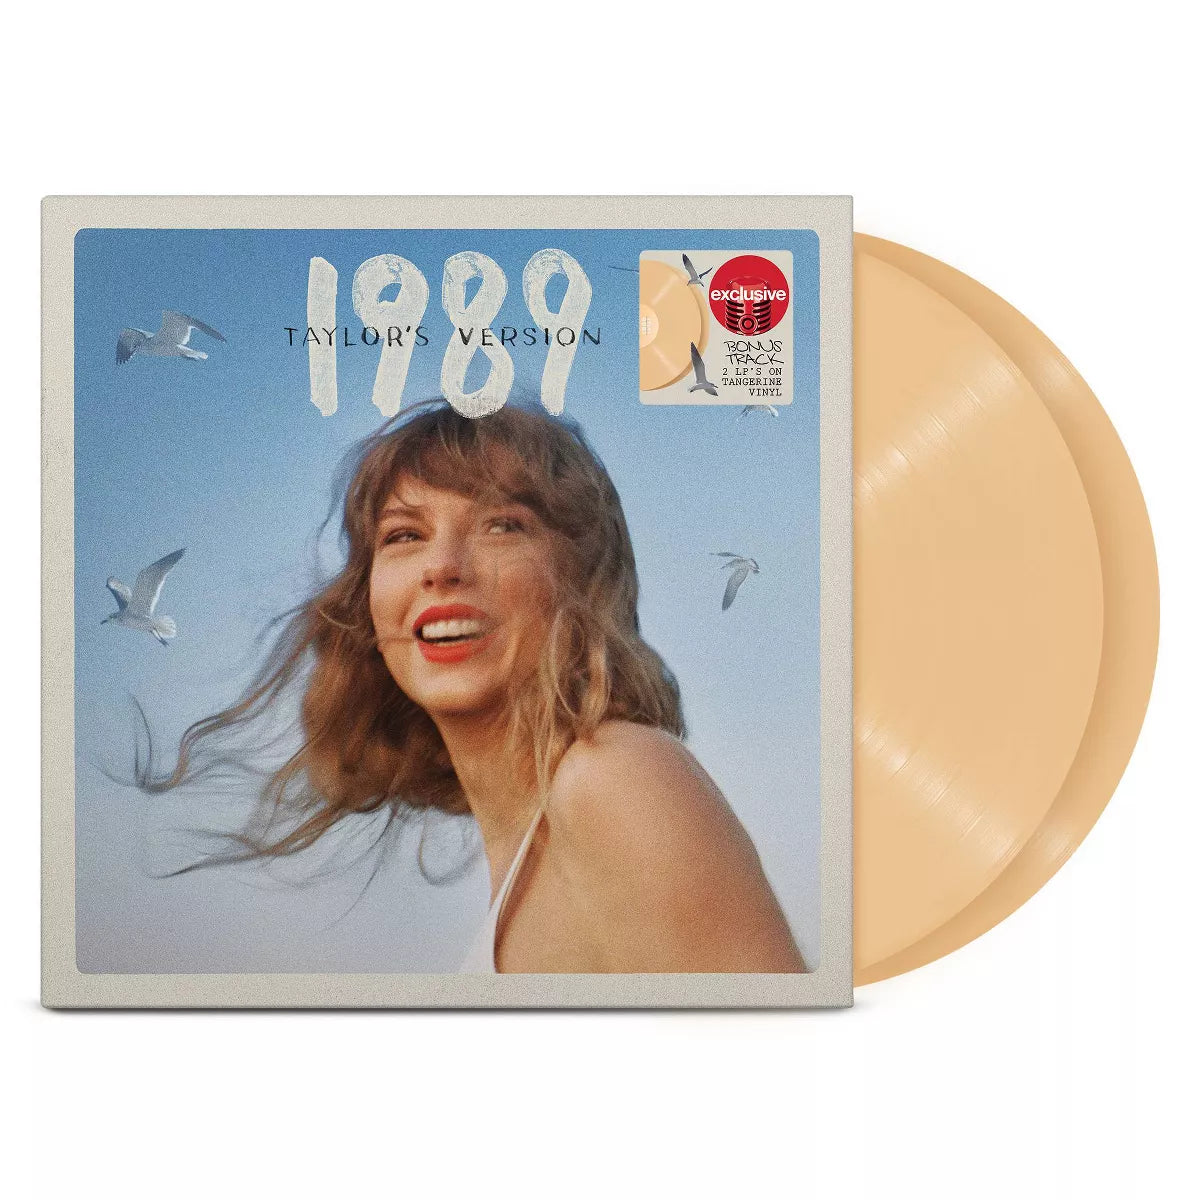 Taylor Swift - 1989 (Taylor's Version) 2LP (Tangerine Edition, Target Exclusive)